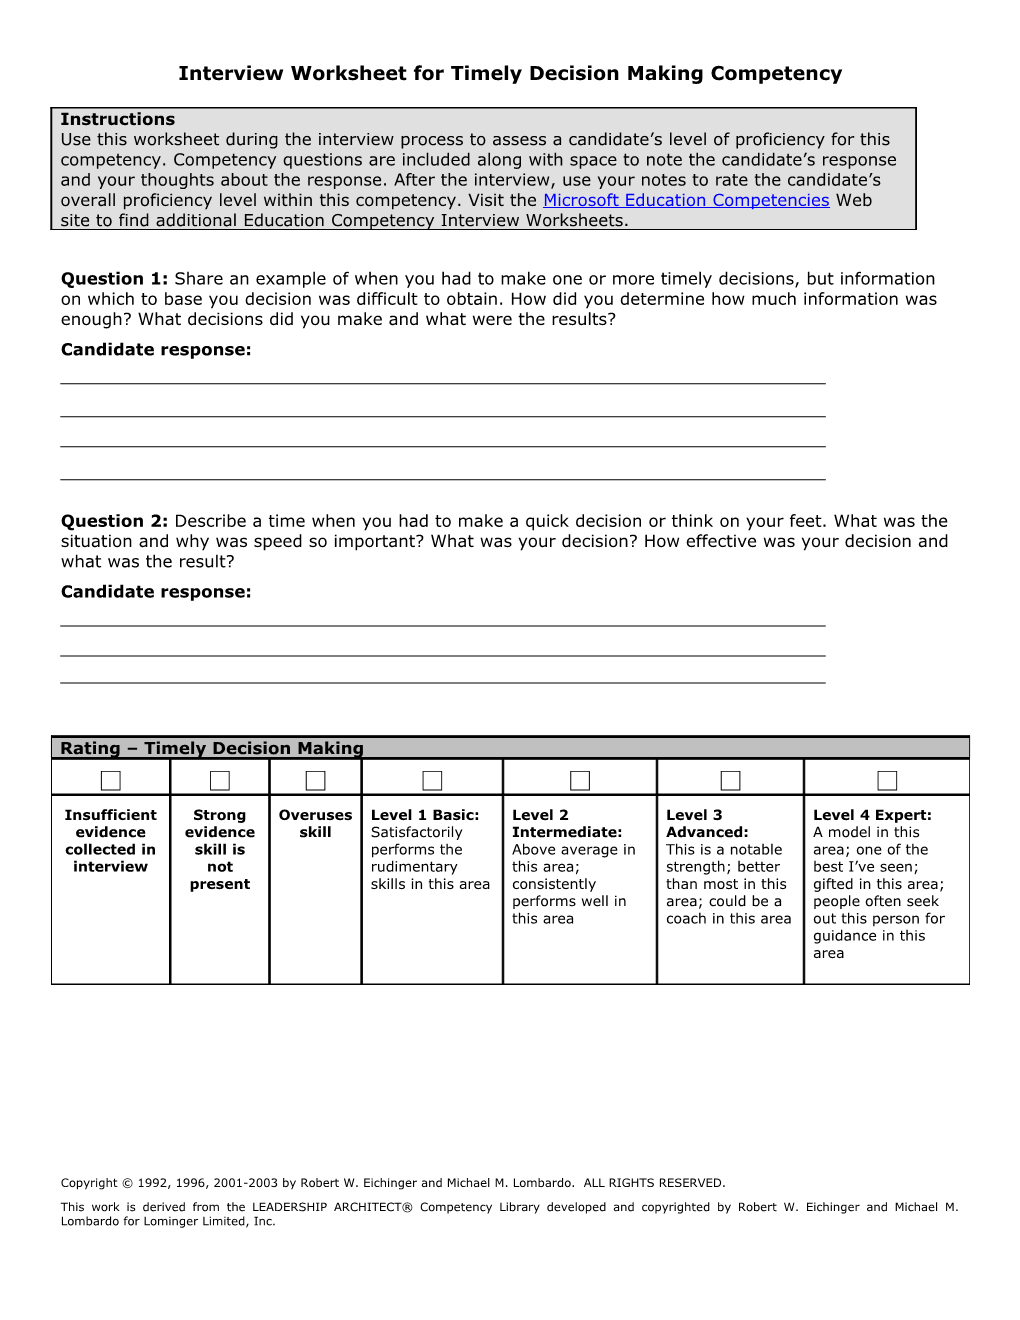 Interview Worksheet for Timely Decision Making Competency